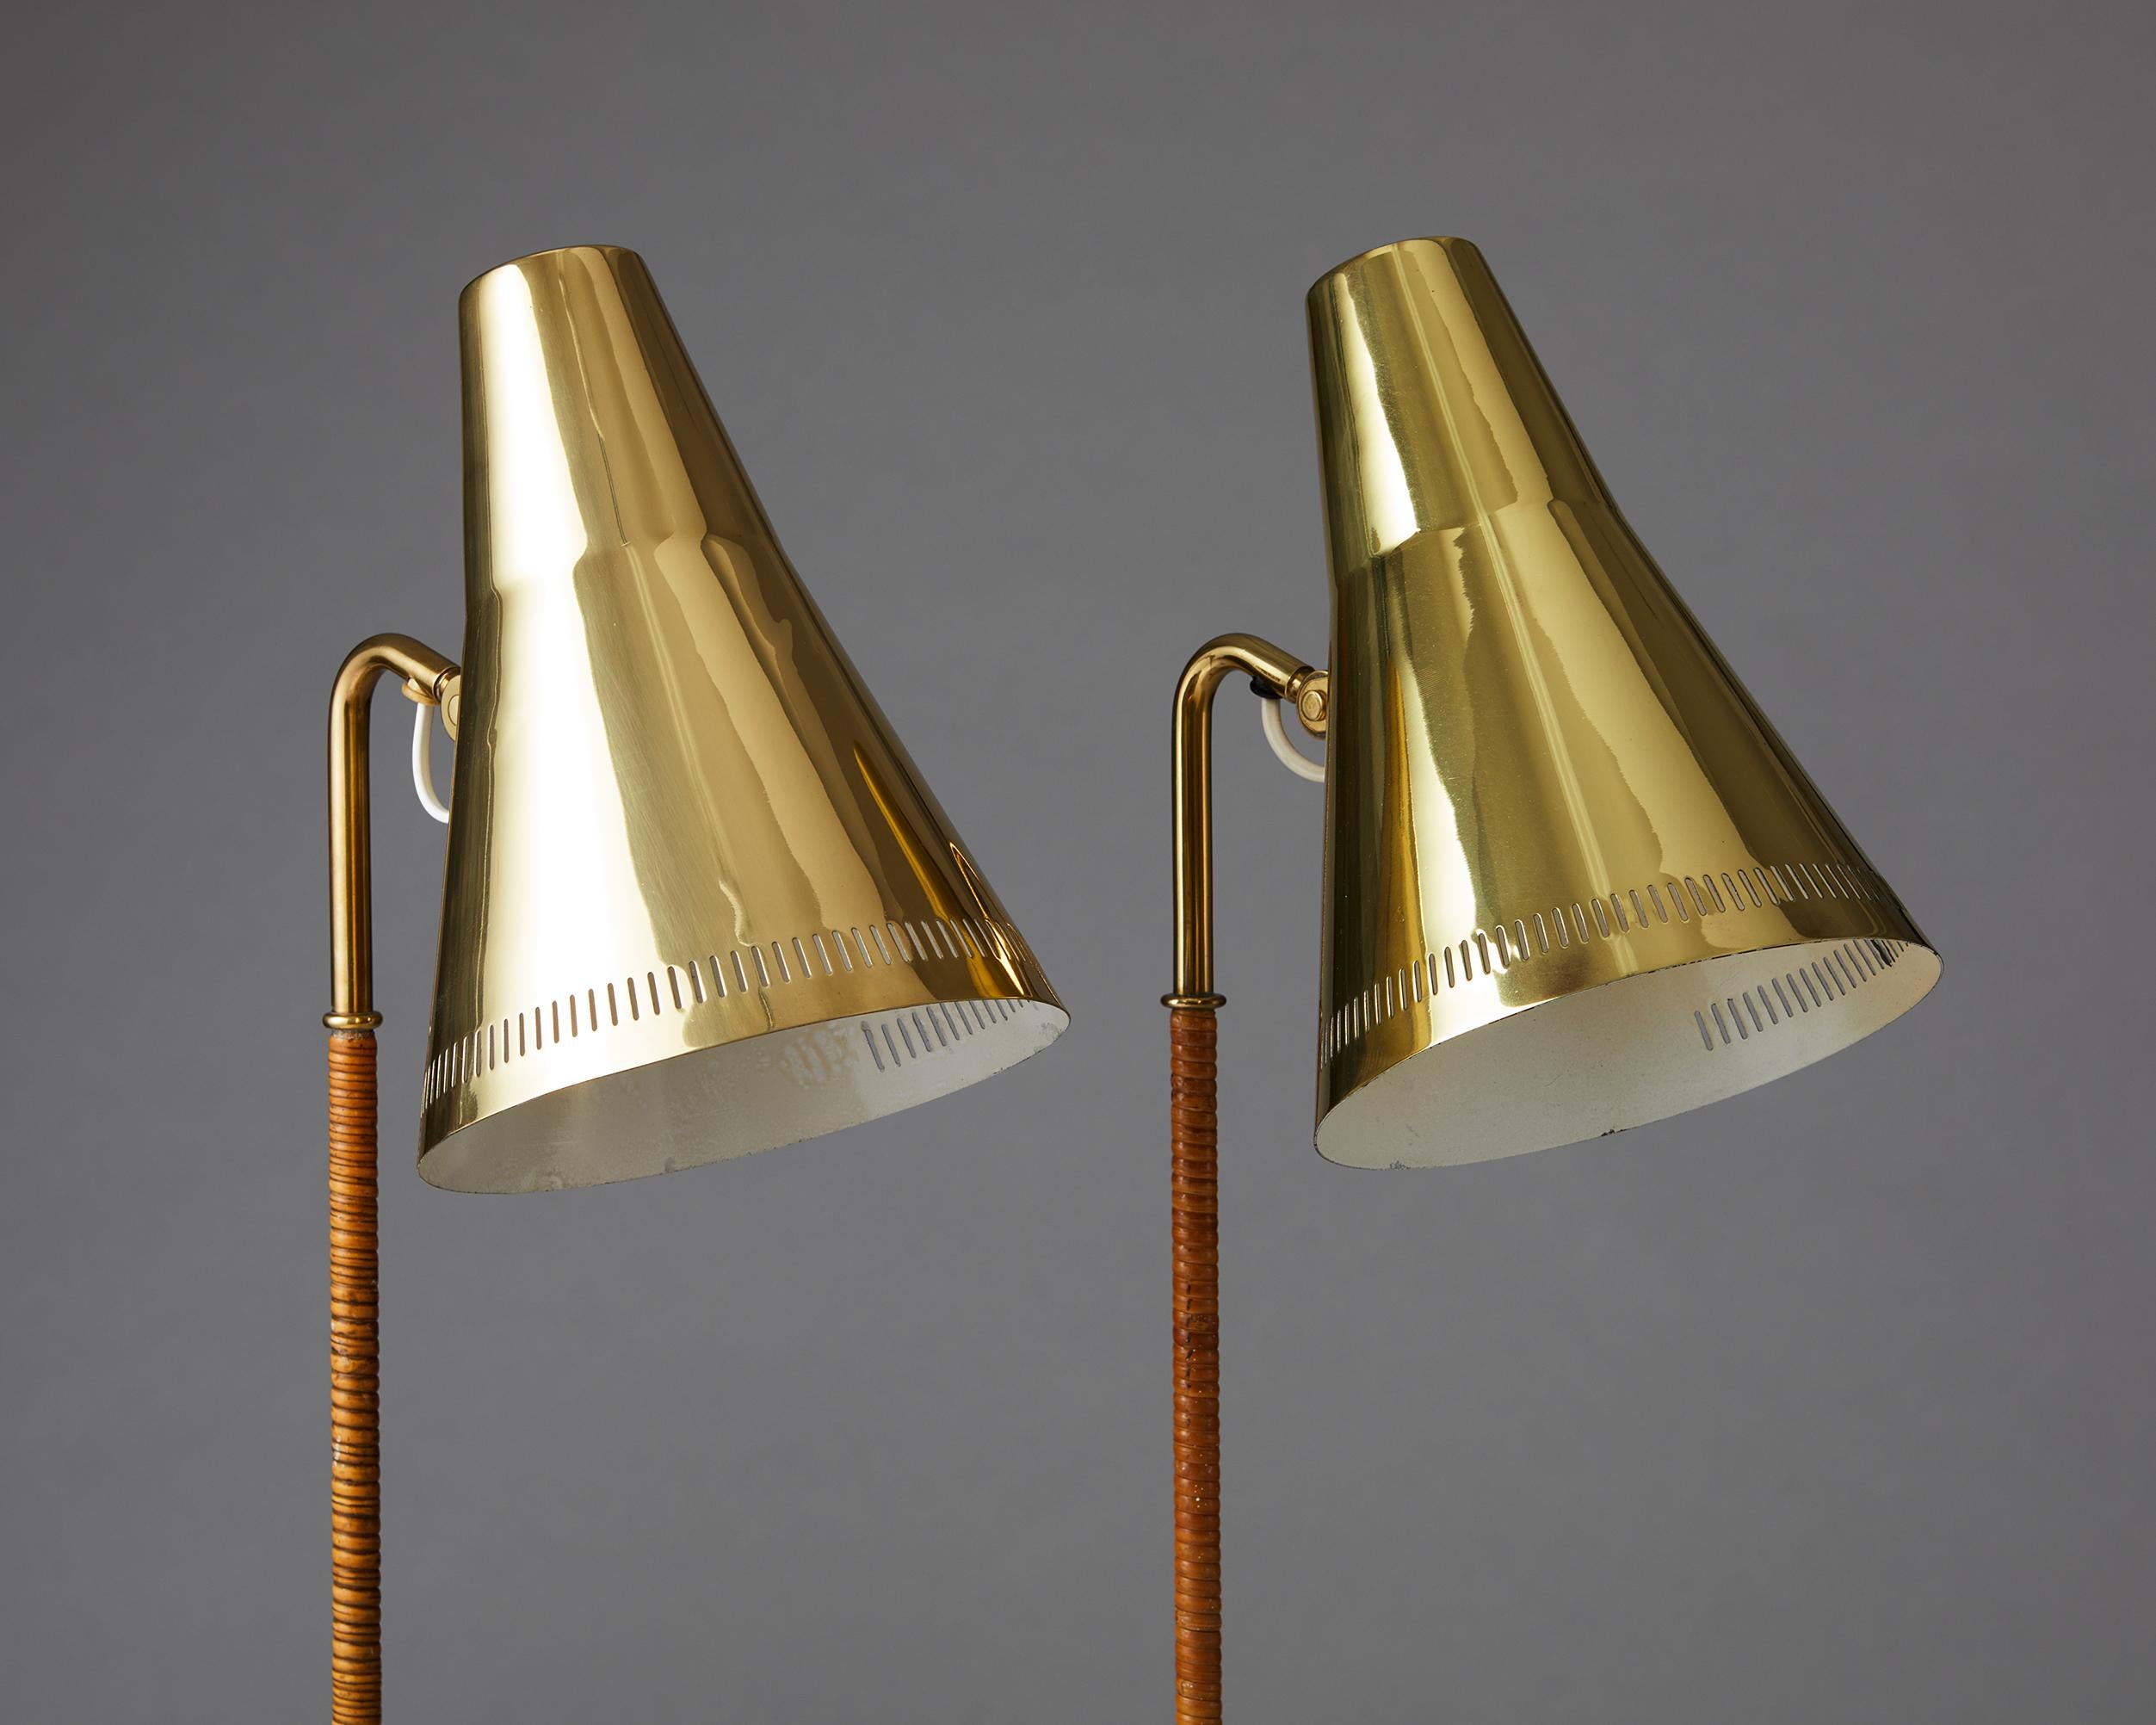 Finnish Pair of Floor Lamps Model 9628 Designed by Paavo Tynell for Taito Oy